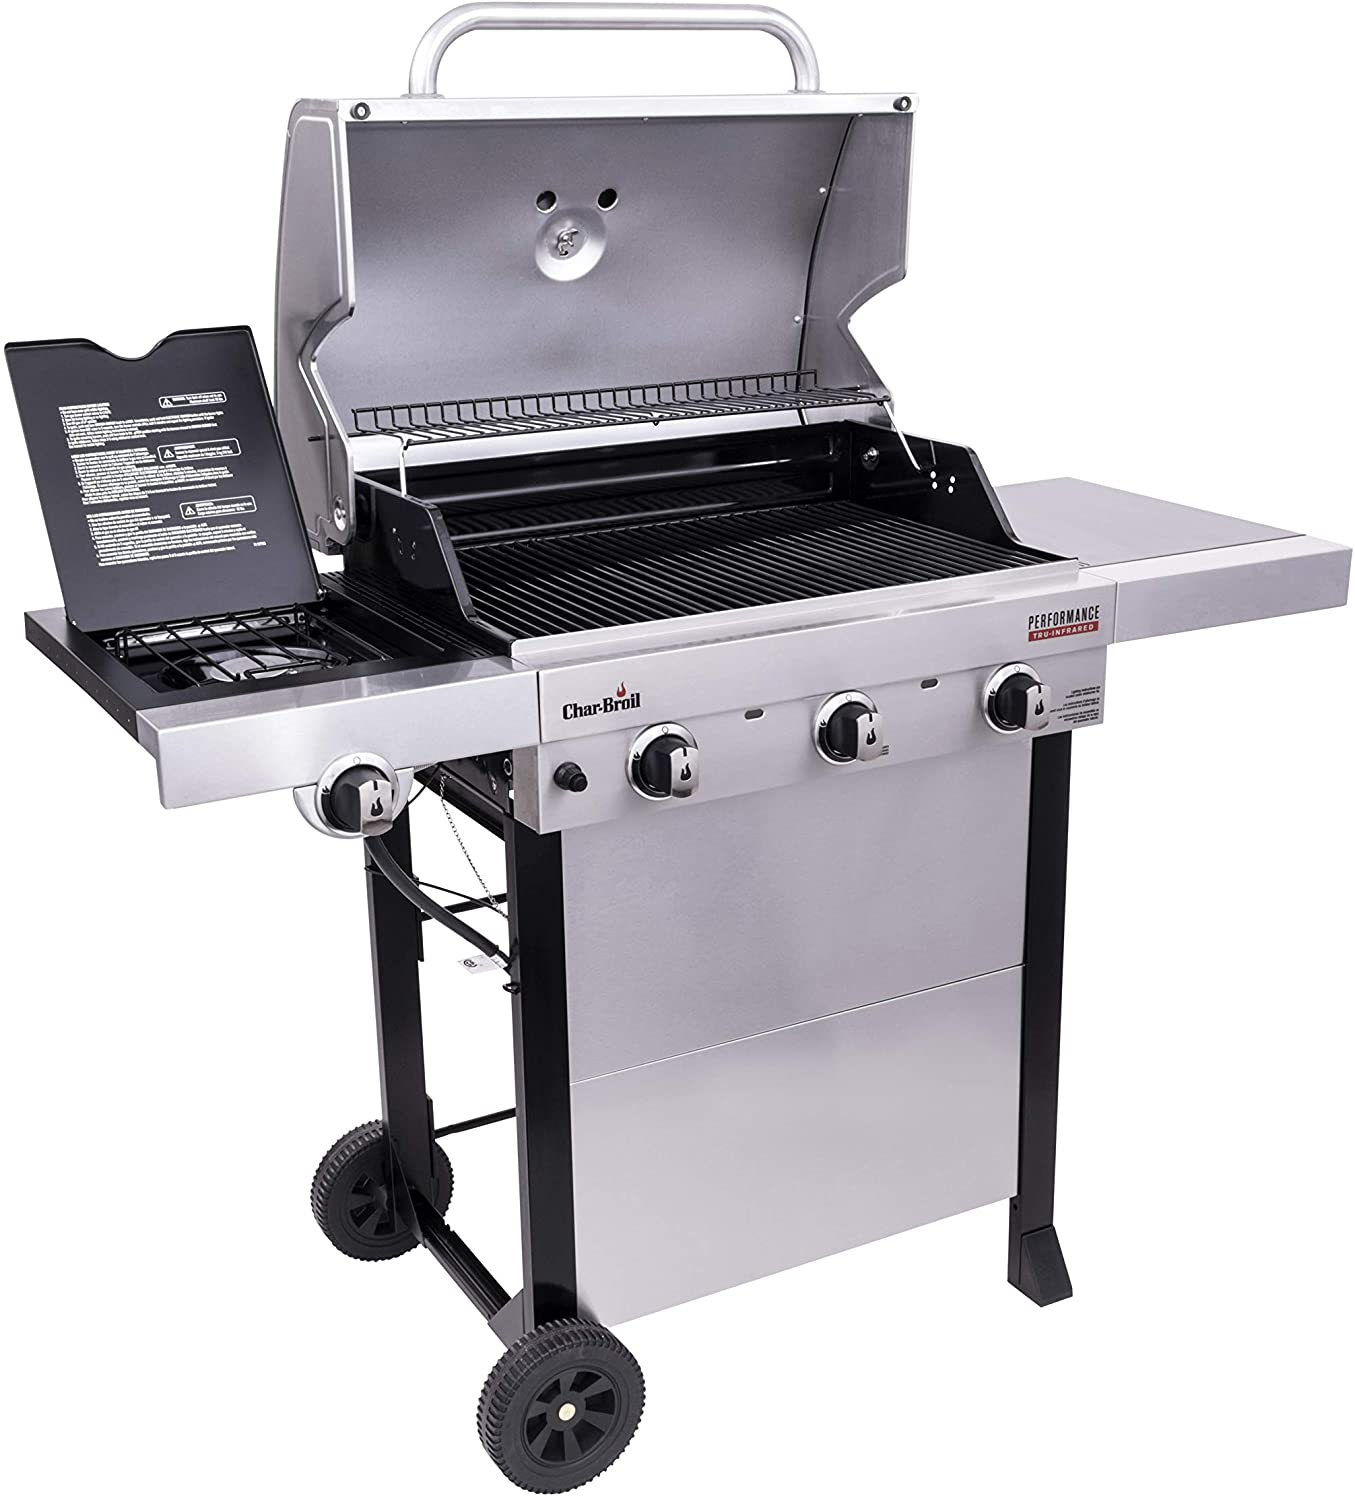 Char-Broil 463370719 Performance TRU-Infrared 3-Burner Cart Style Gas Grill, Stainless Steel - image 4 of 6